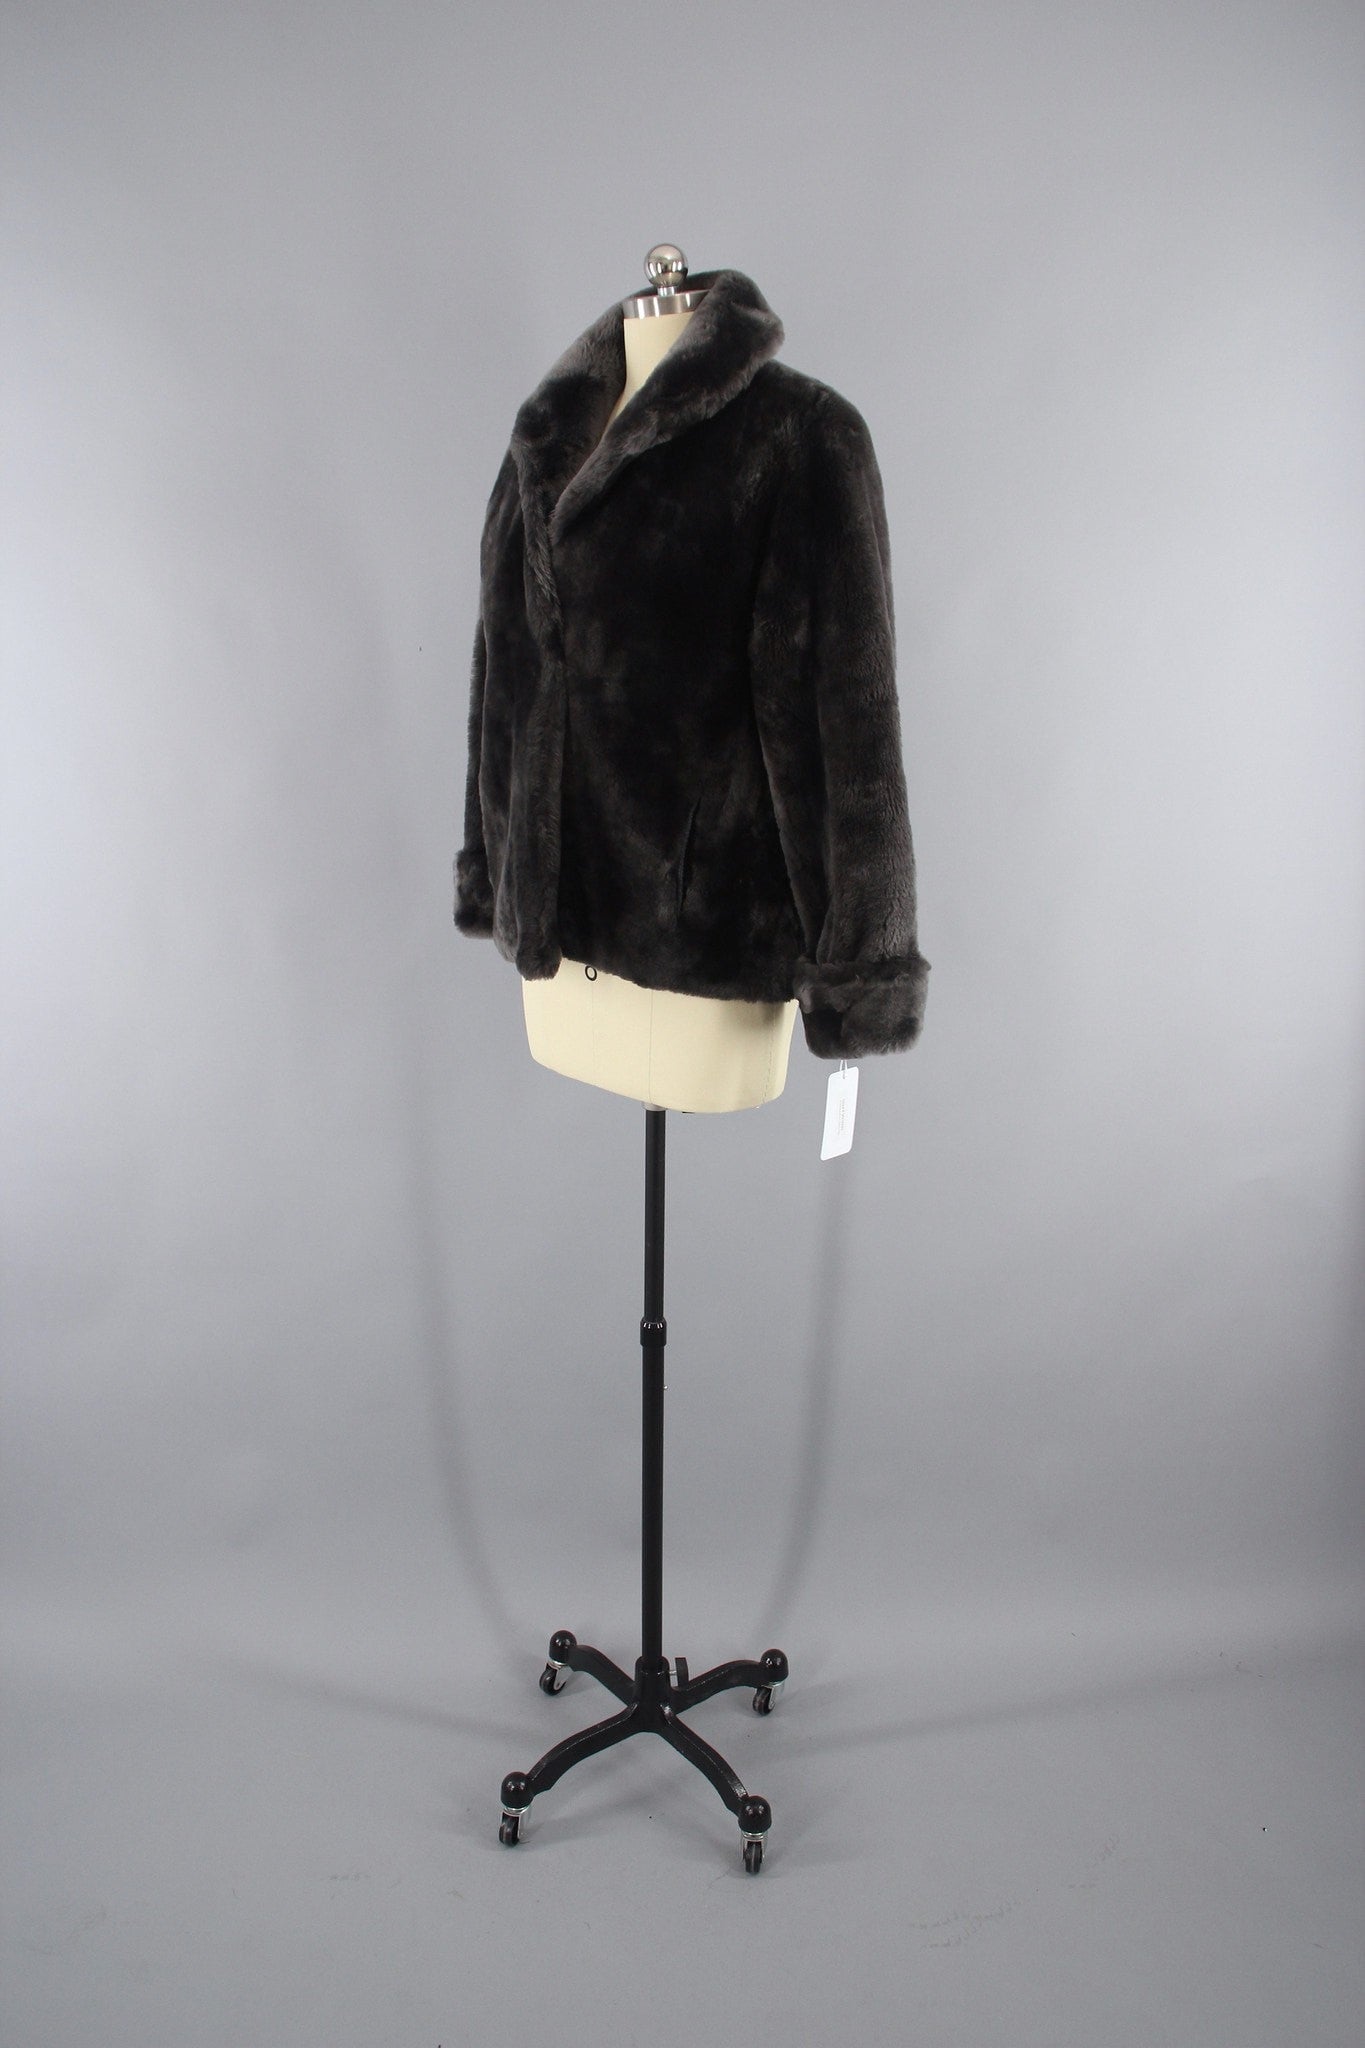 1950s Mouton Fur Coat in SILVER Brown - ThisBlueBird